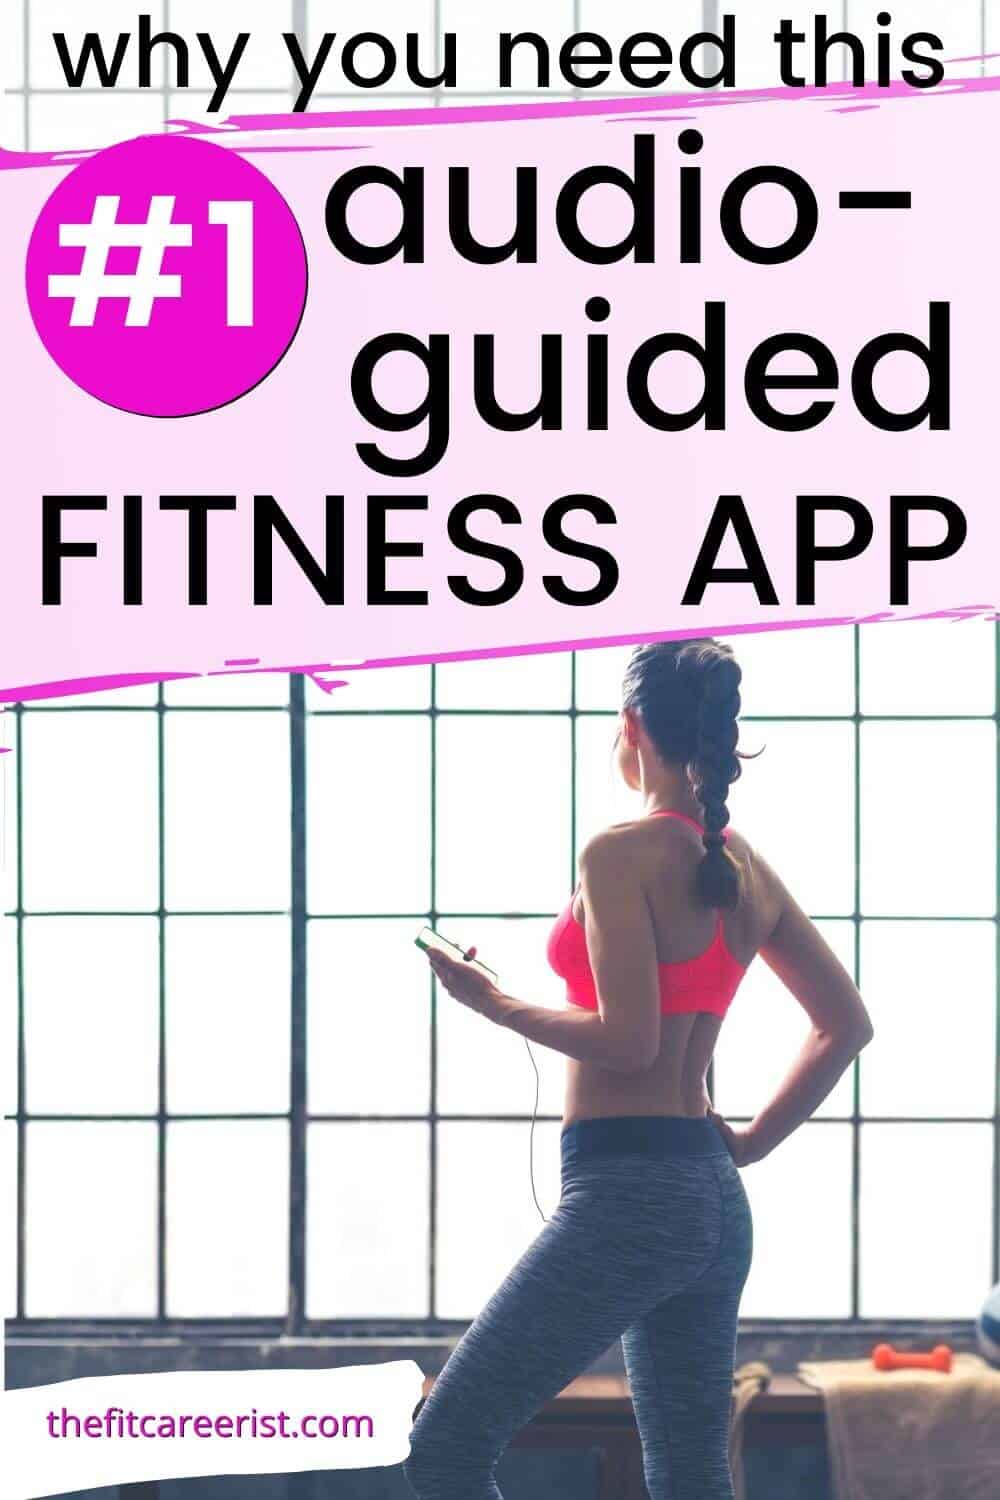 audio guided fitness app